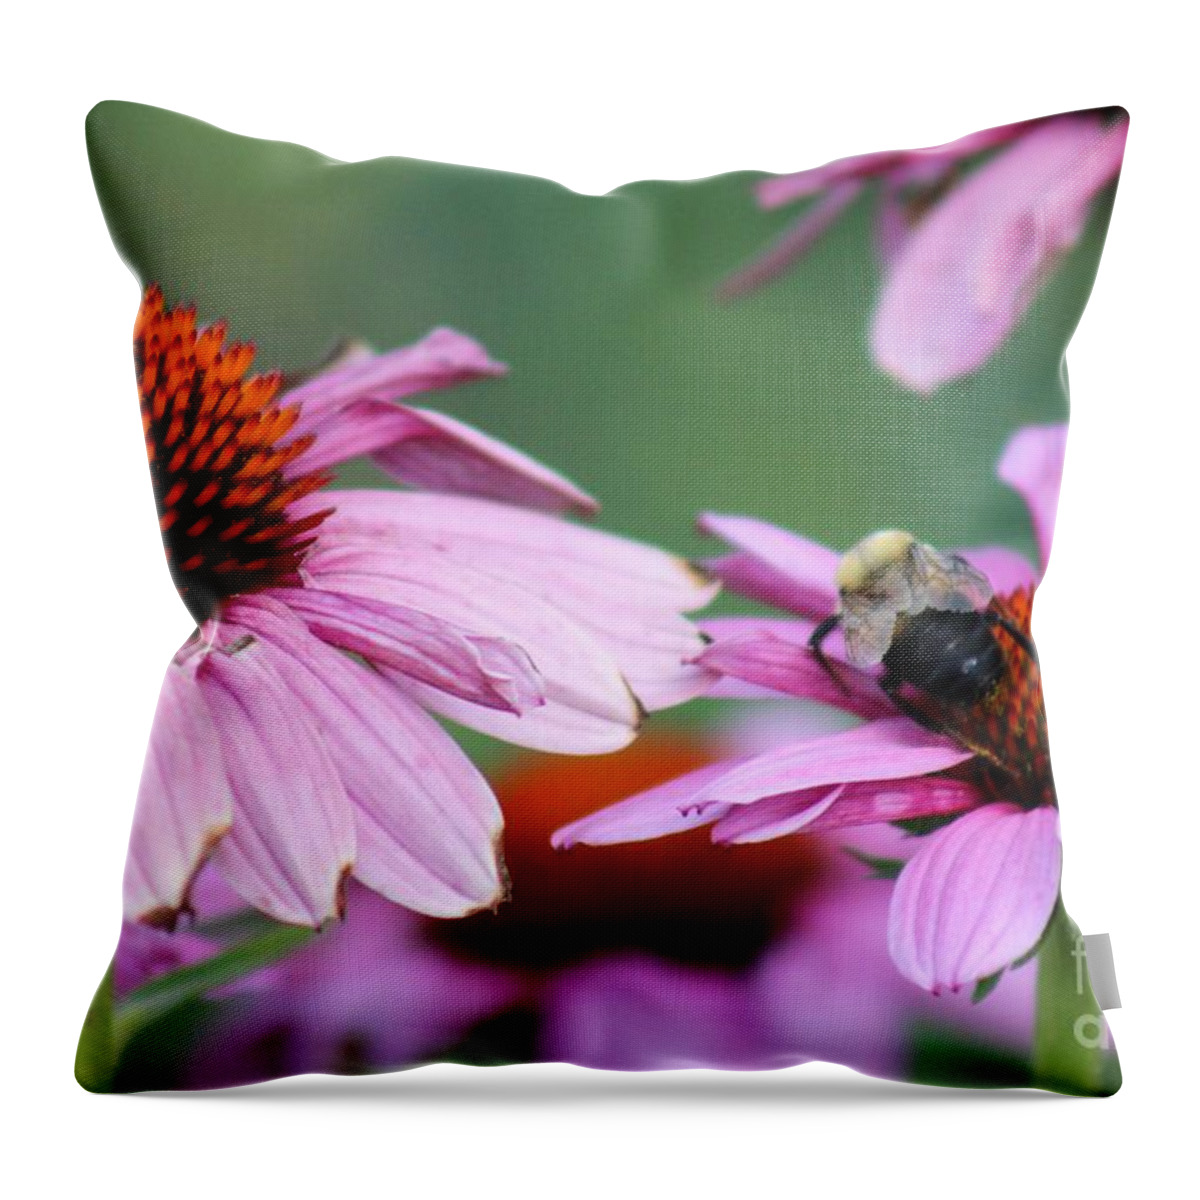 Pink Throw Pillow featuring the photograph Nature's Beauty 71 by Deena Withycombe